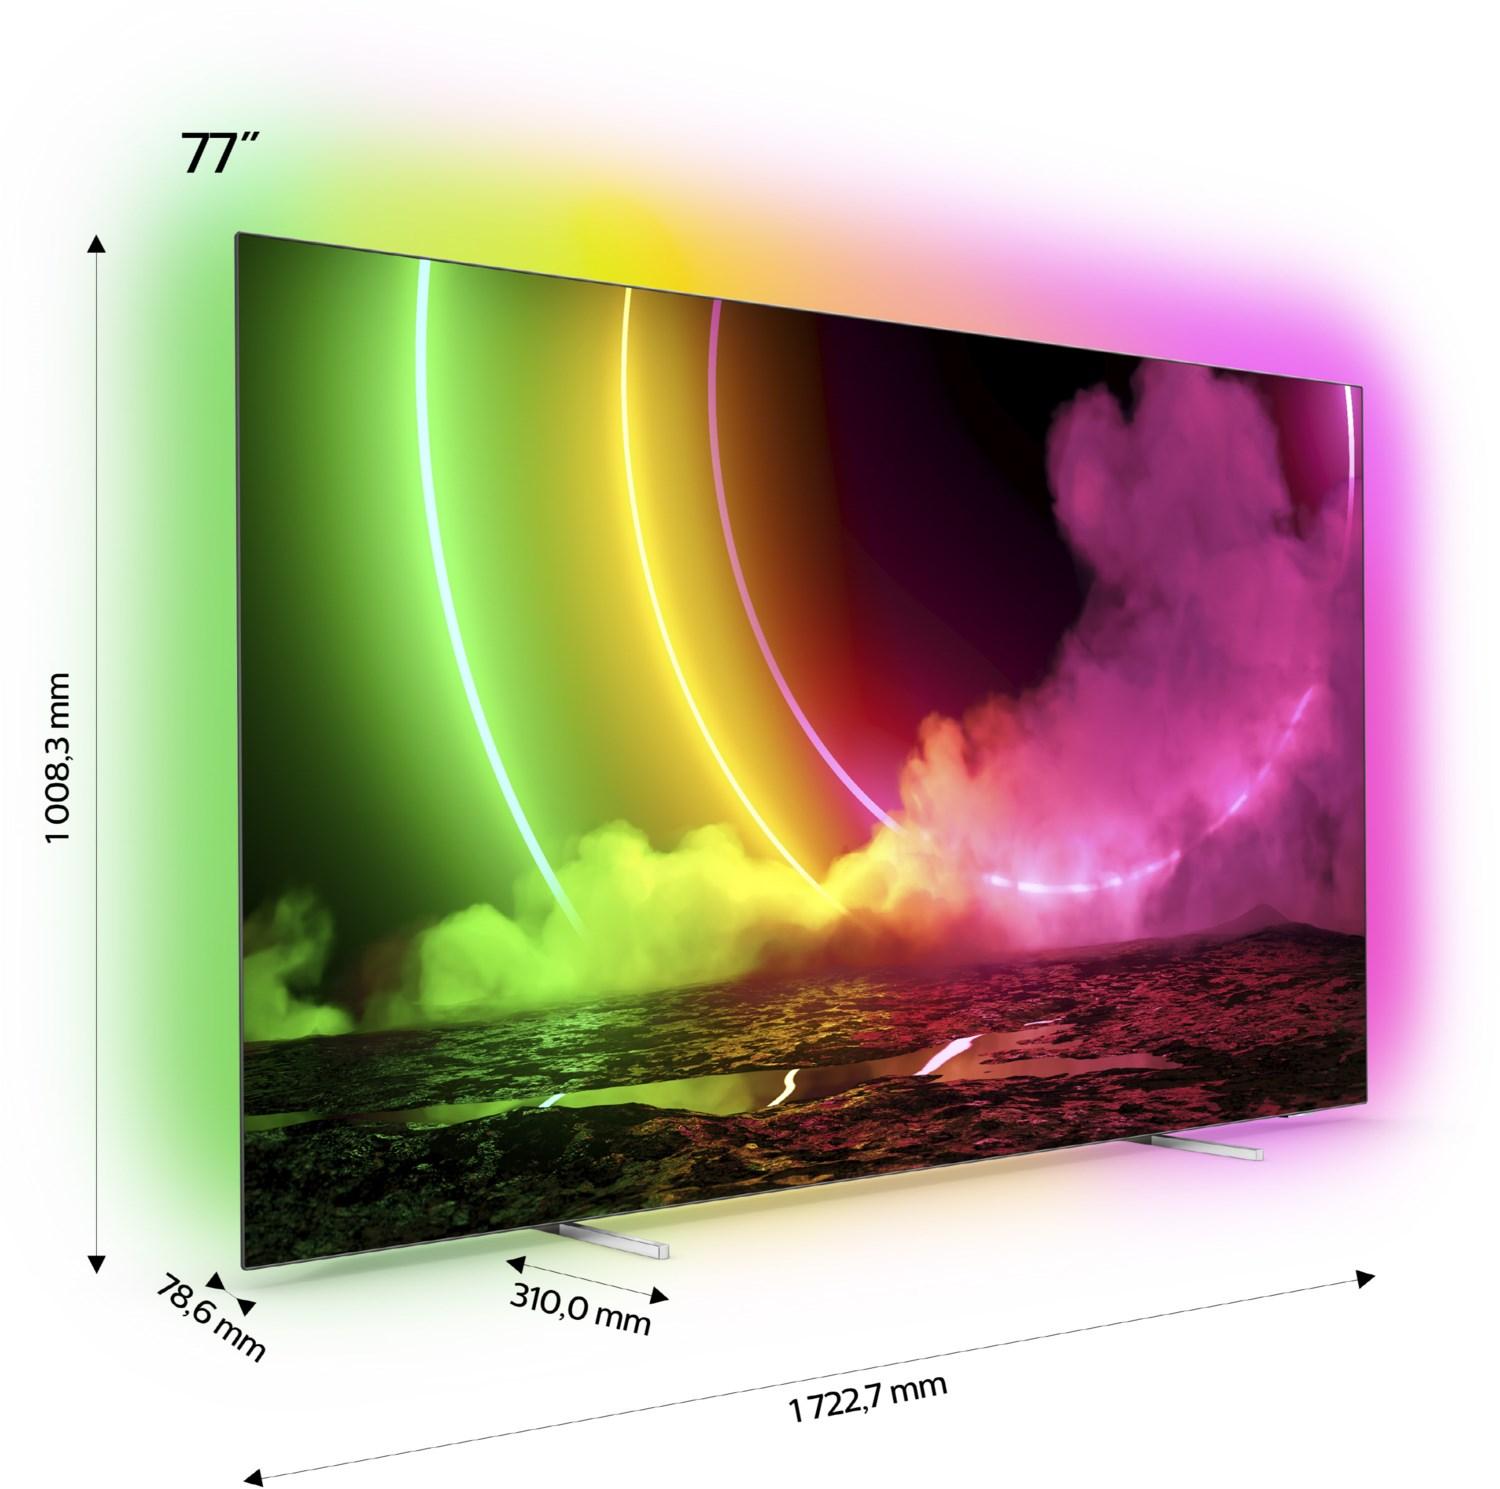 Selected image for Philips Televizor 77OLED806/12 77", Smart, 4K, OLED, 120HZ, Android, Ambilight, Sivi